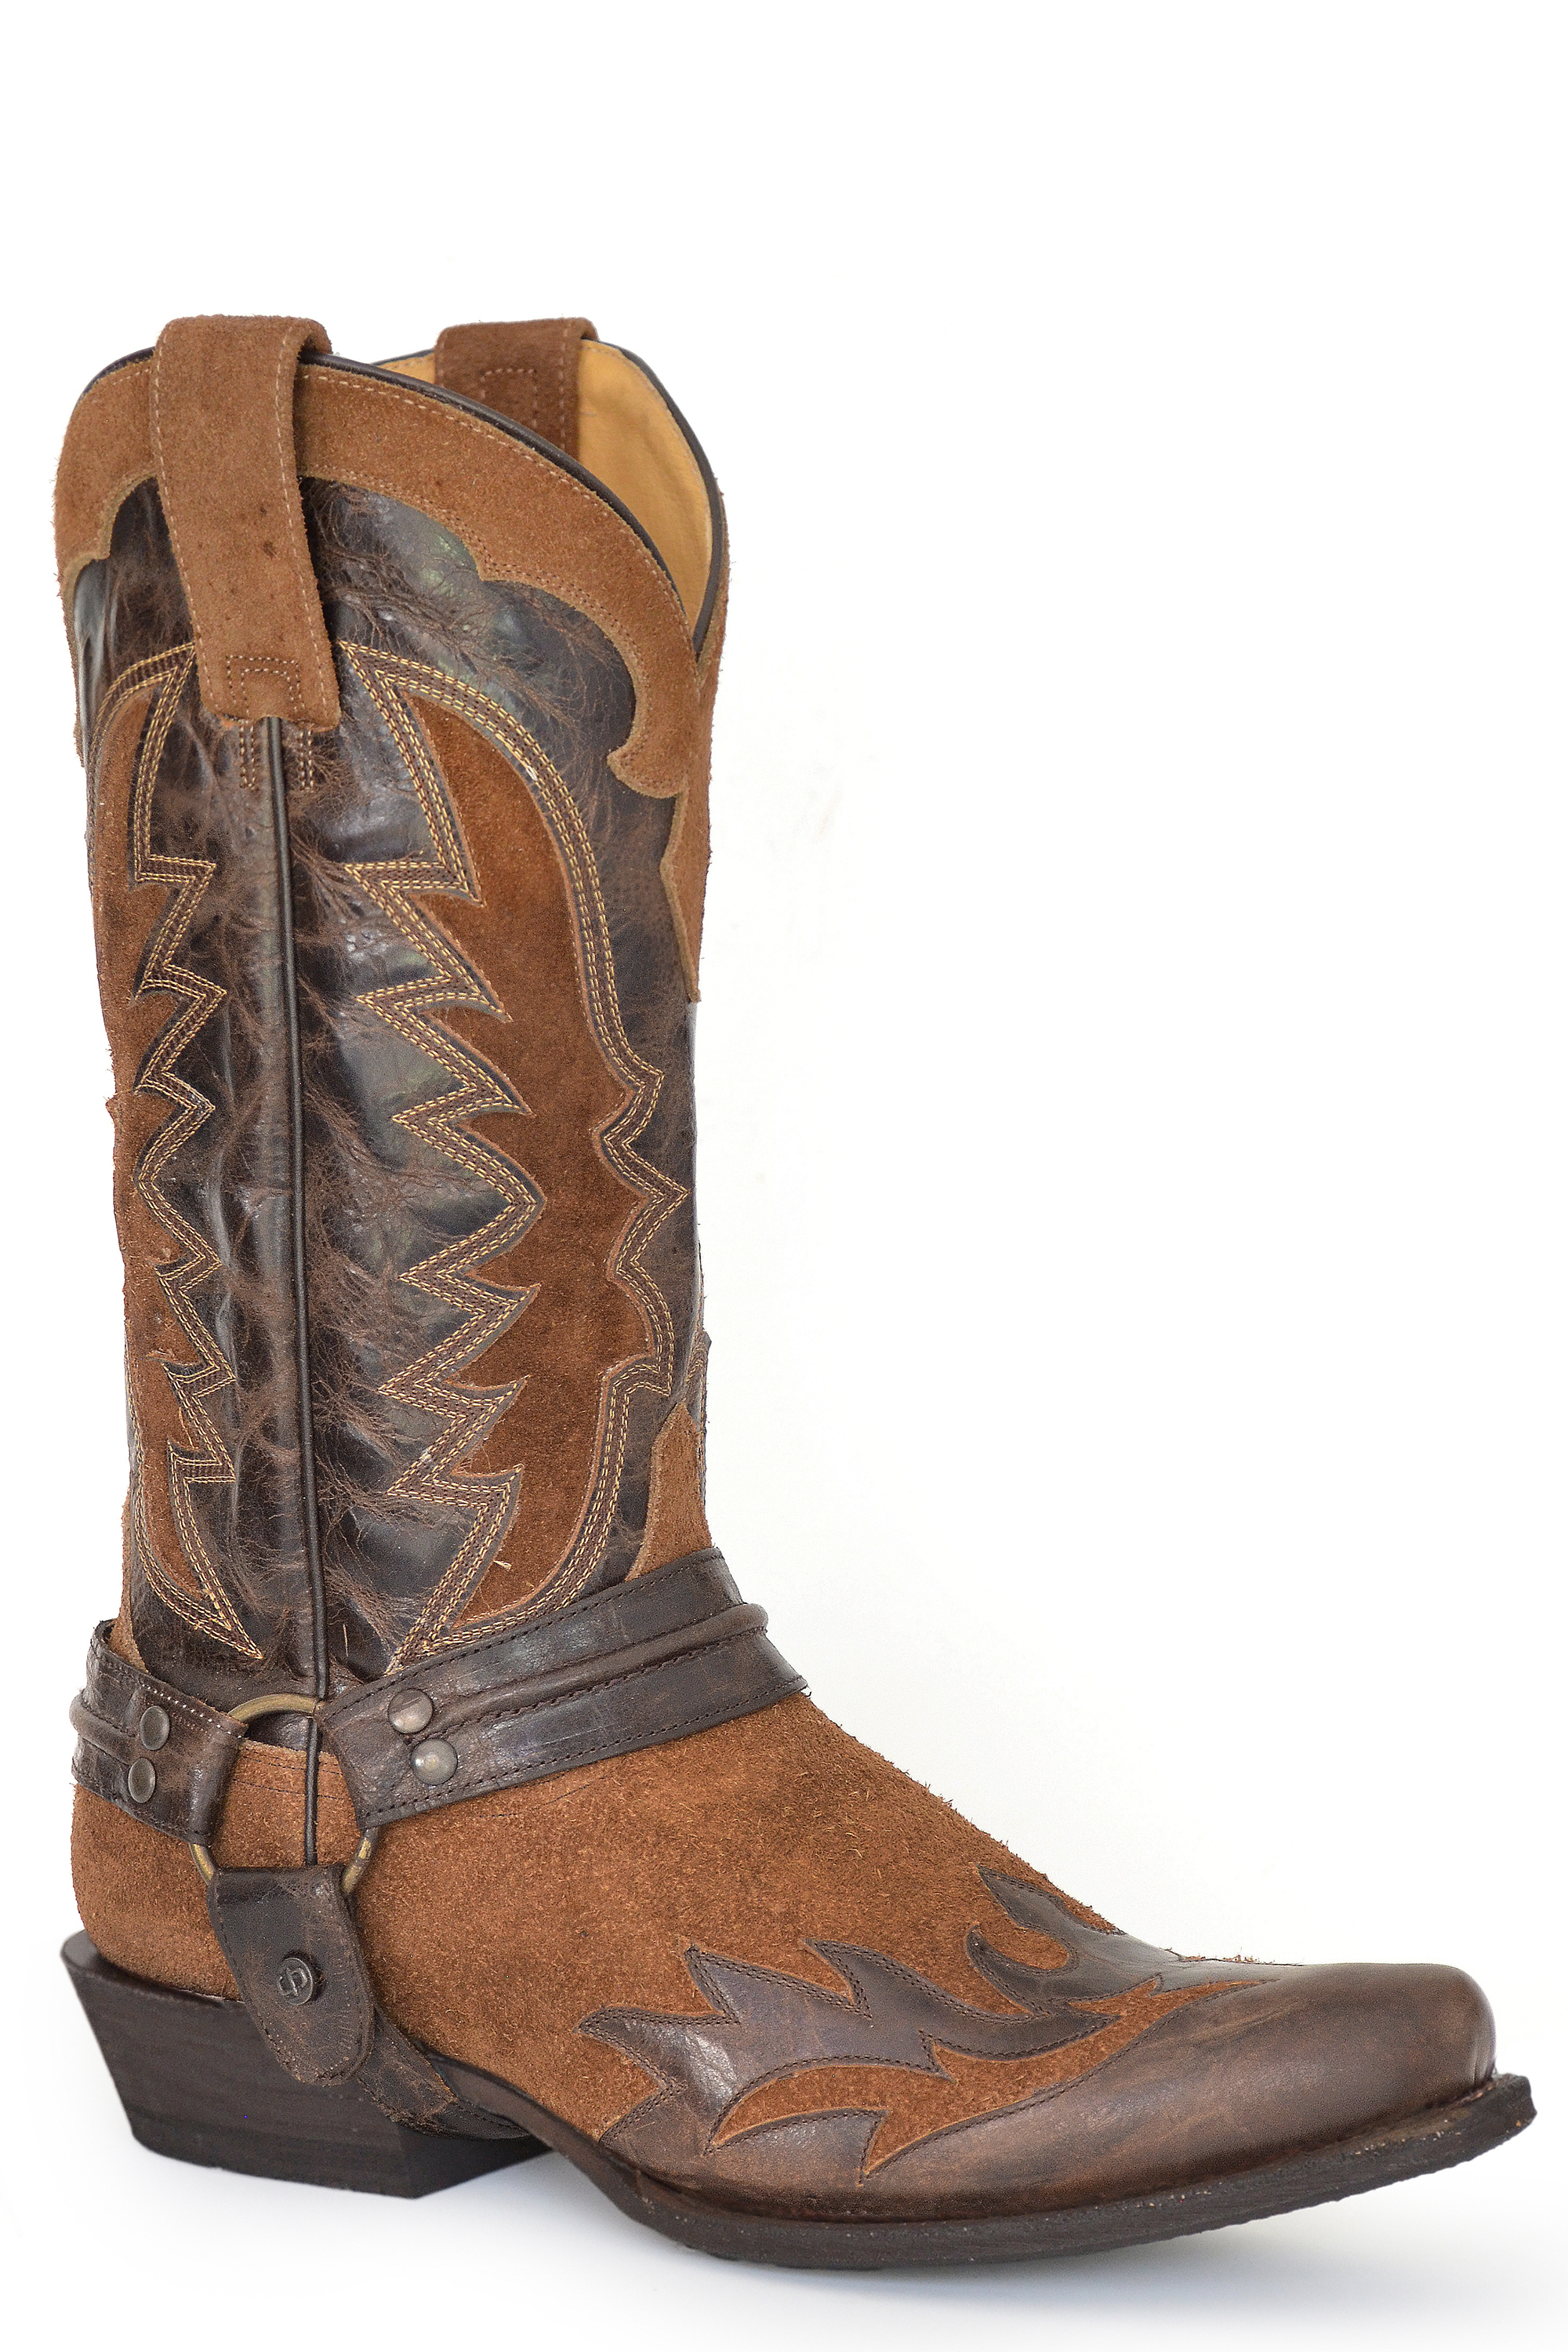 Stetson Out Law Wings Boot